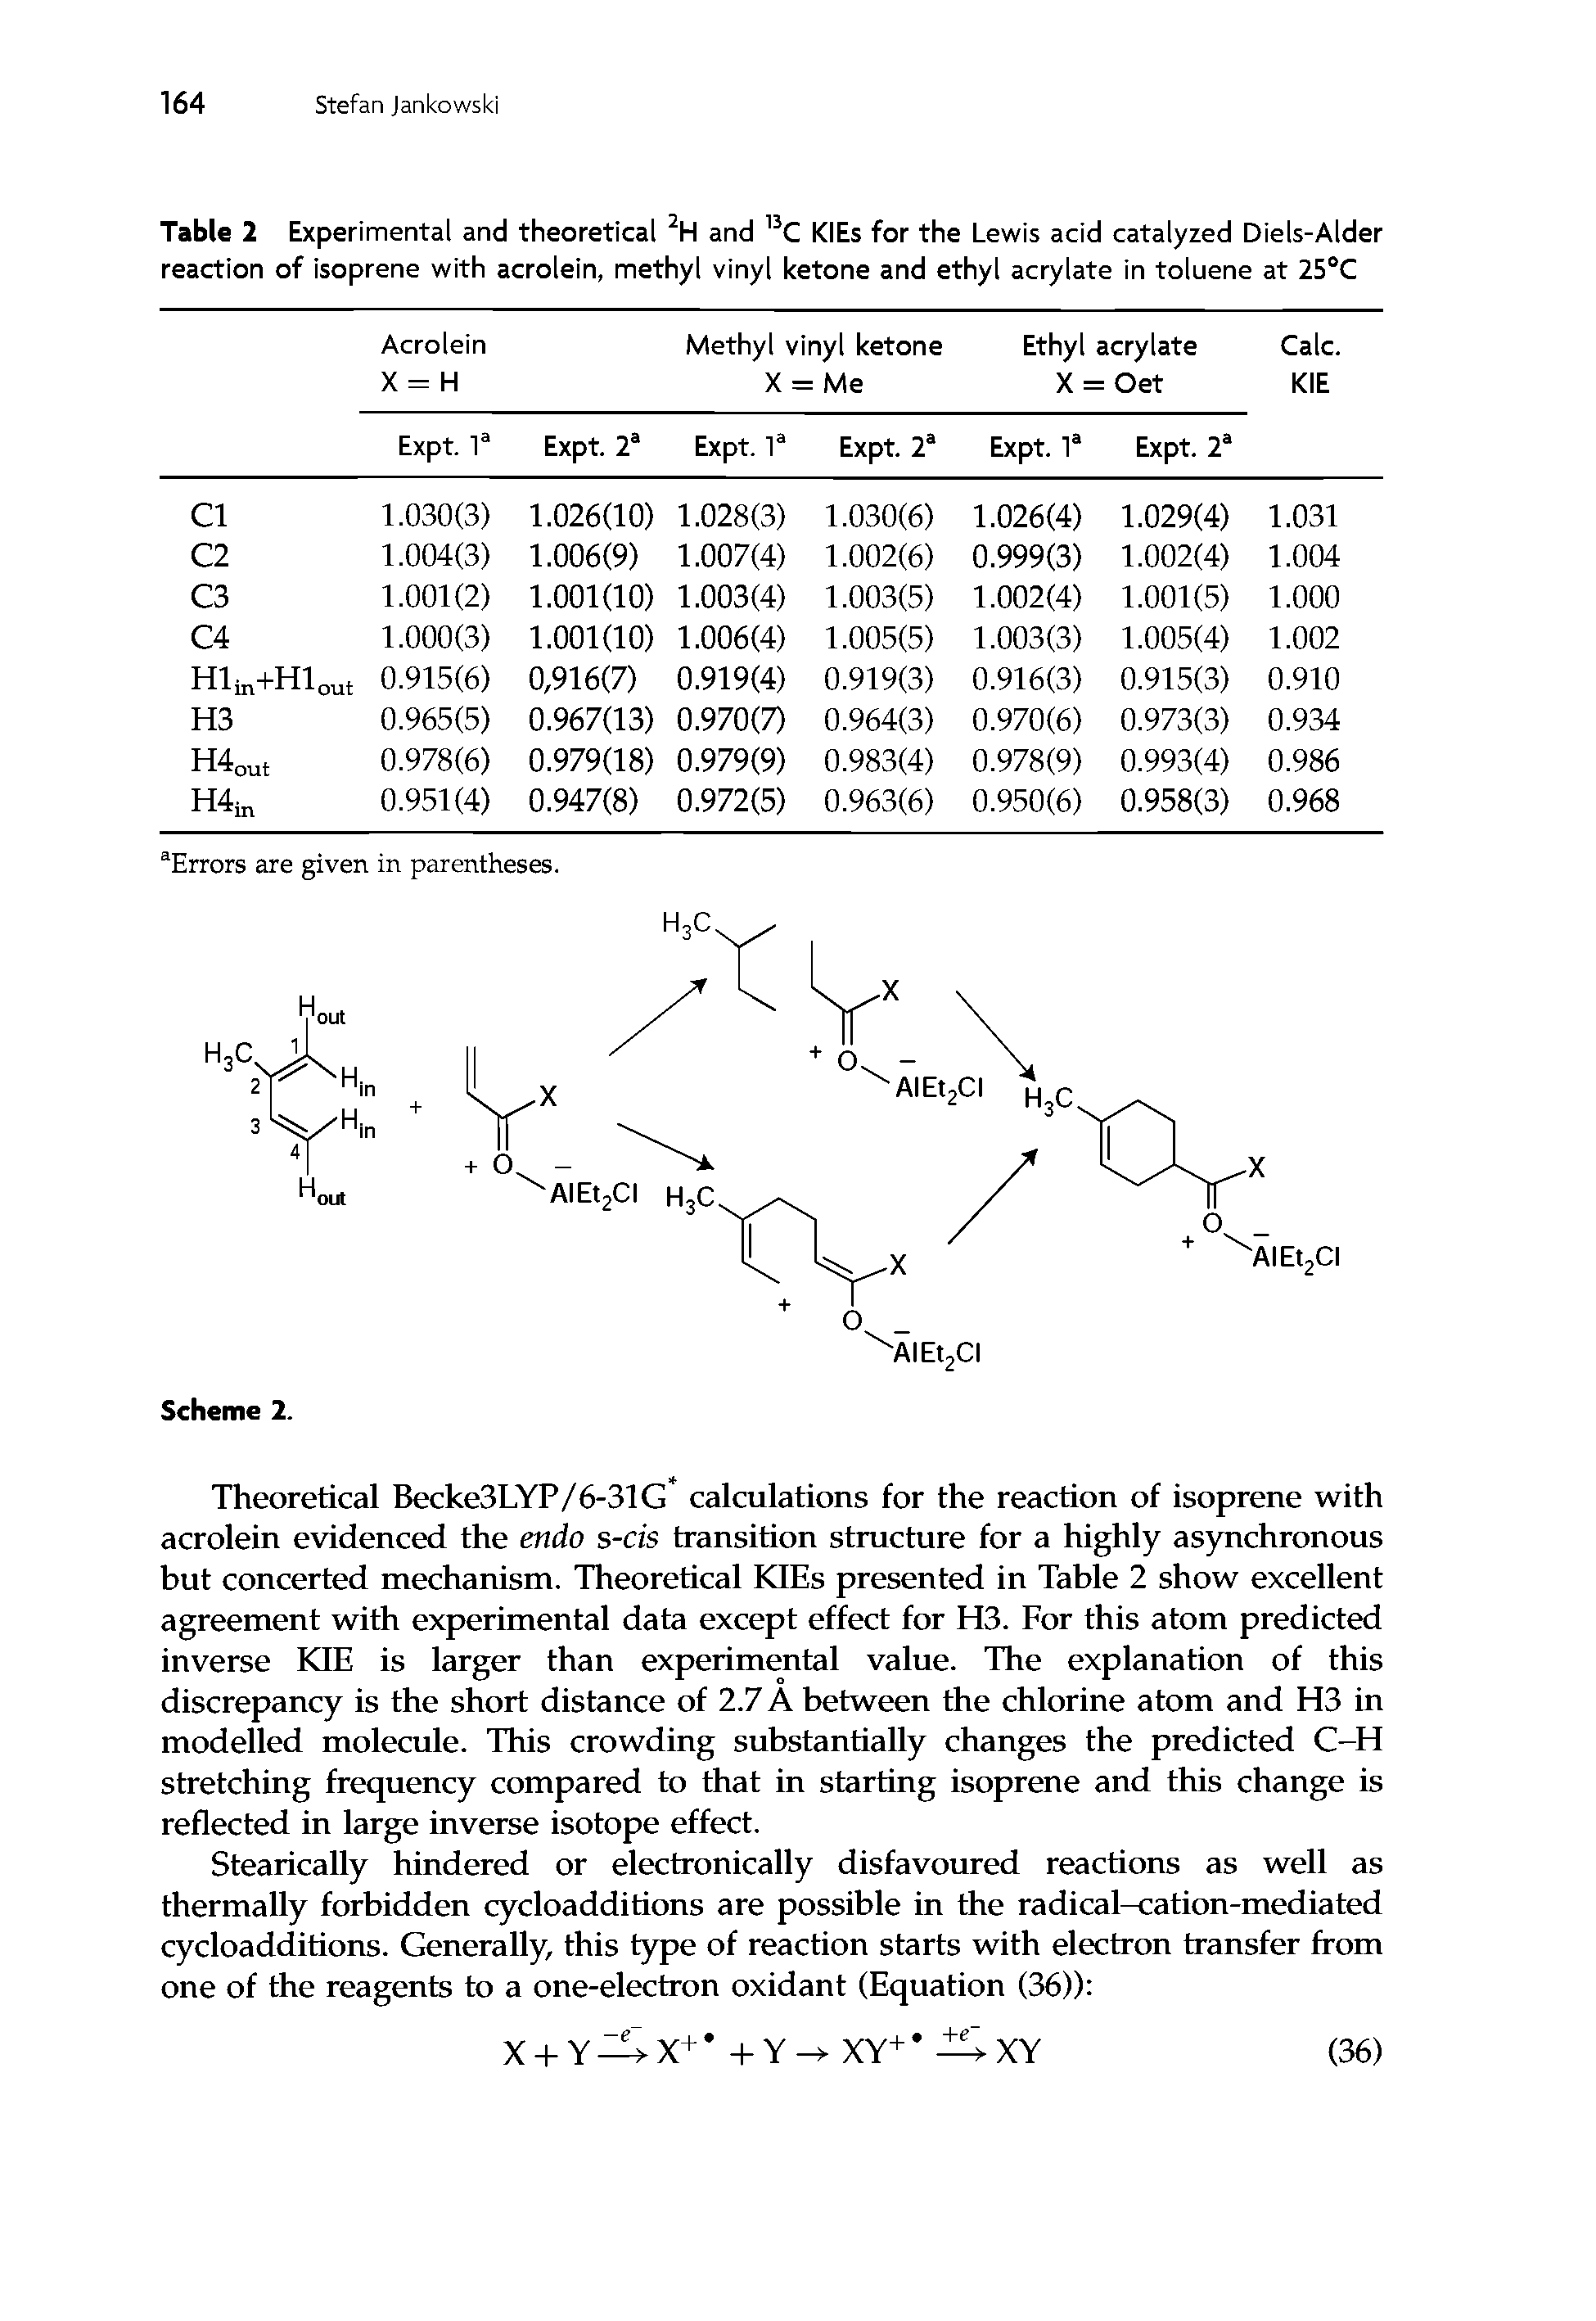 Table 2 Experimental and theoretical 2H and 13C KIEs for the Lewis acid catalyzed Diels-Alder reaction of isoprene with acrolein, methyl vinyl ketone and ethyl acrylate in toluene at 25°C...